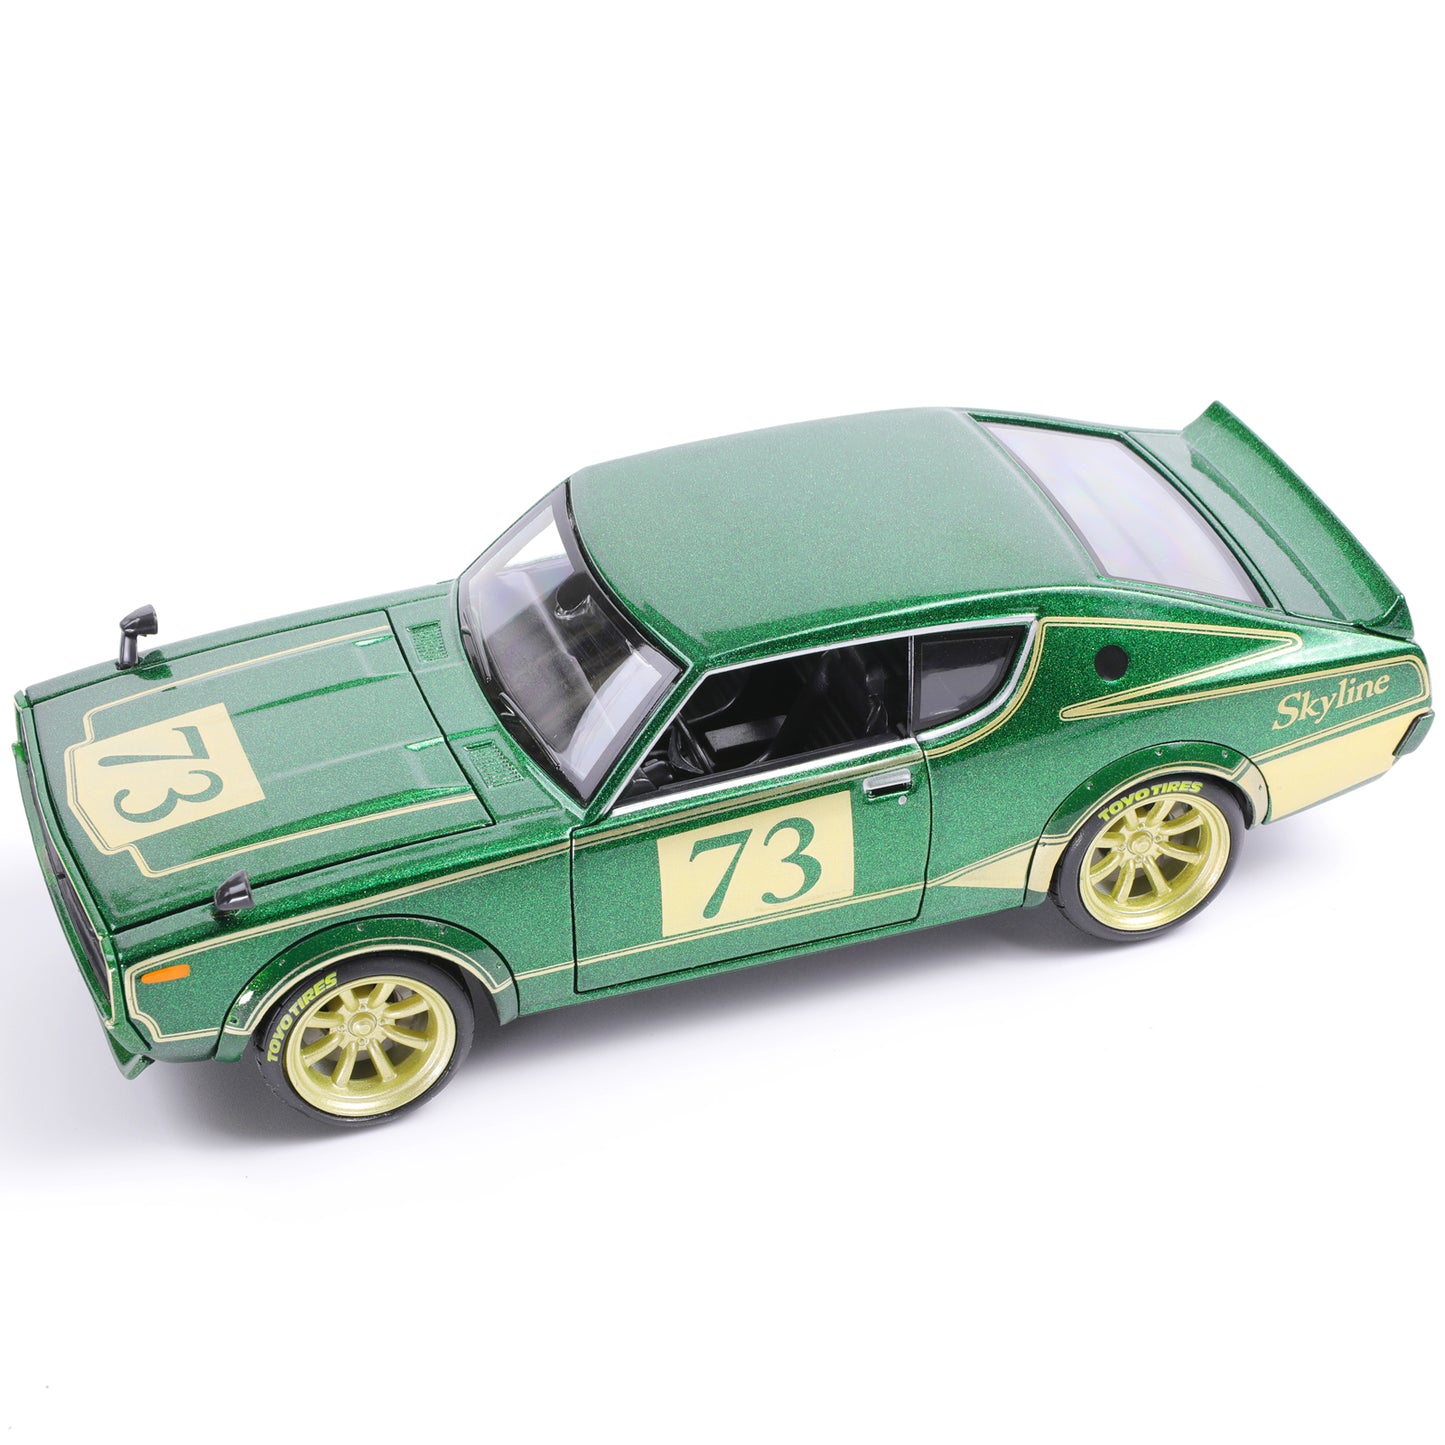 MAISTO 1:24 Scale 1973 NISSAN Skyling 2000GT-R (KPGC110) Die Cast Metal Toy Cars Building Kit Collectible & Gift for Kids